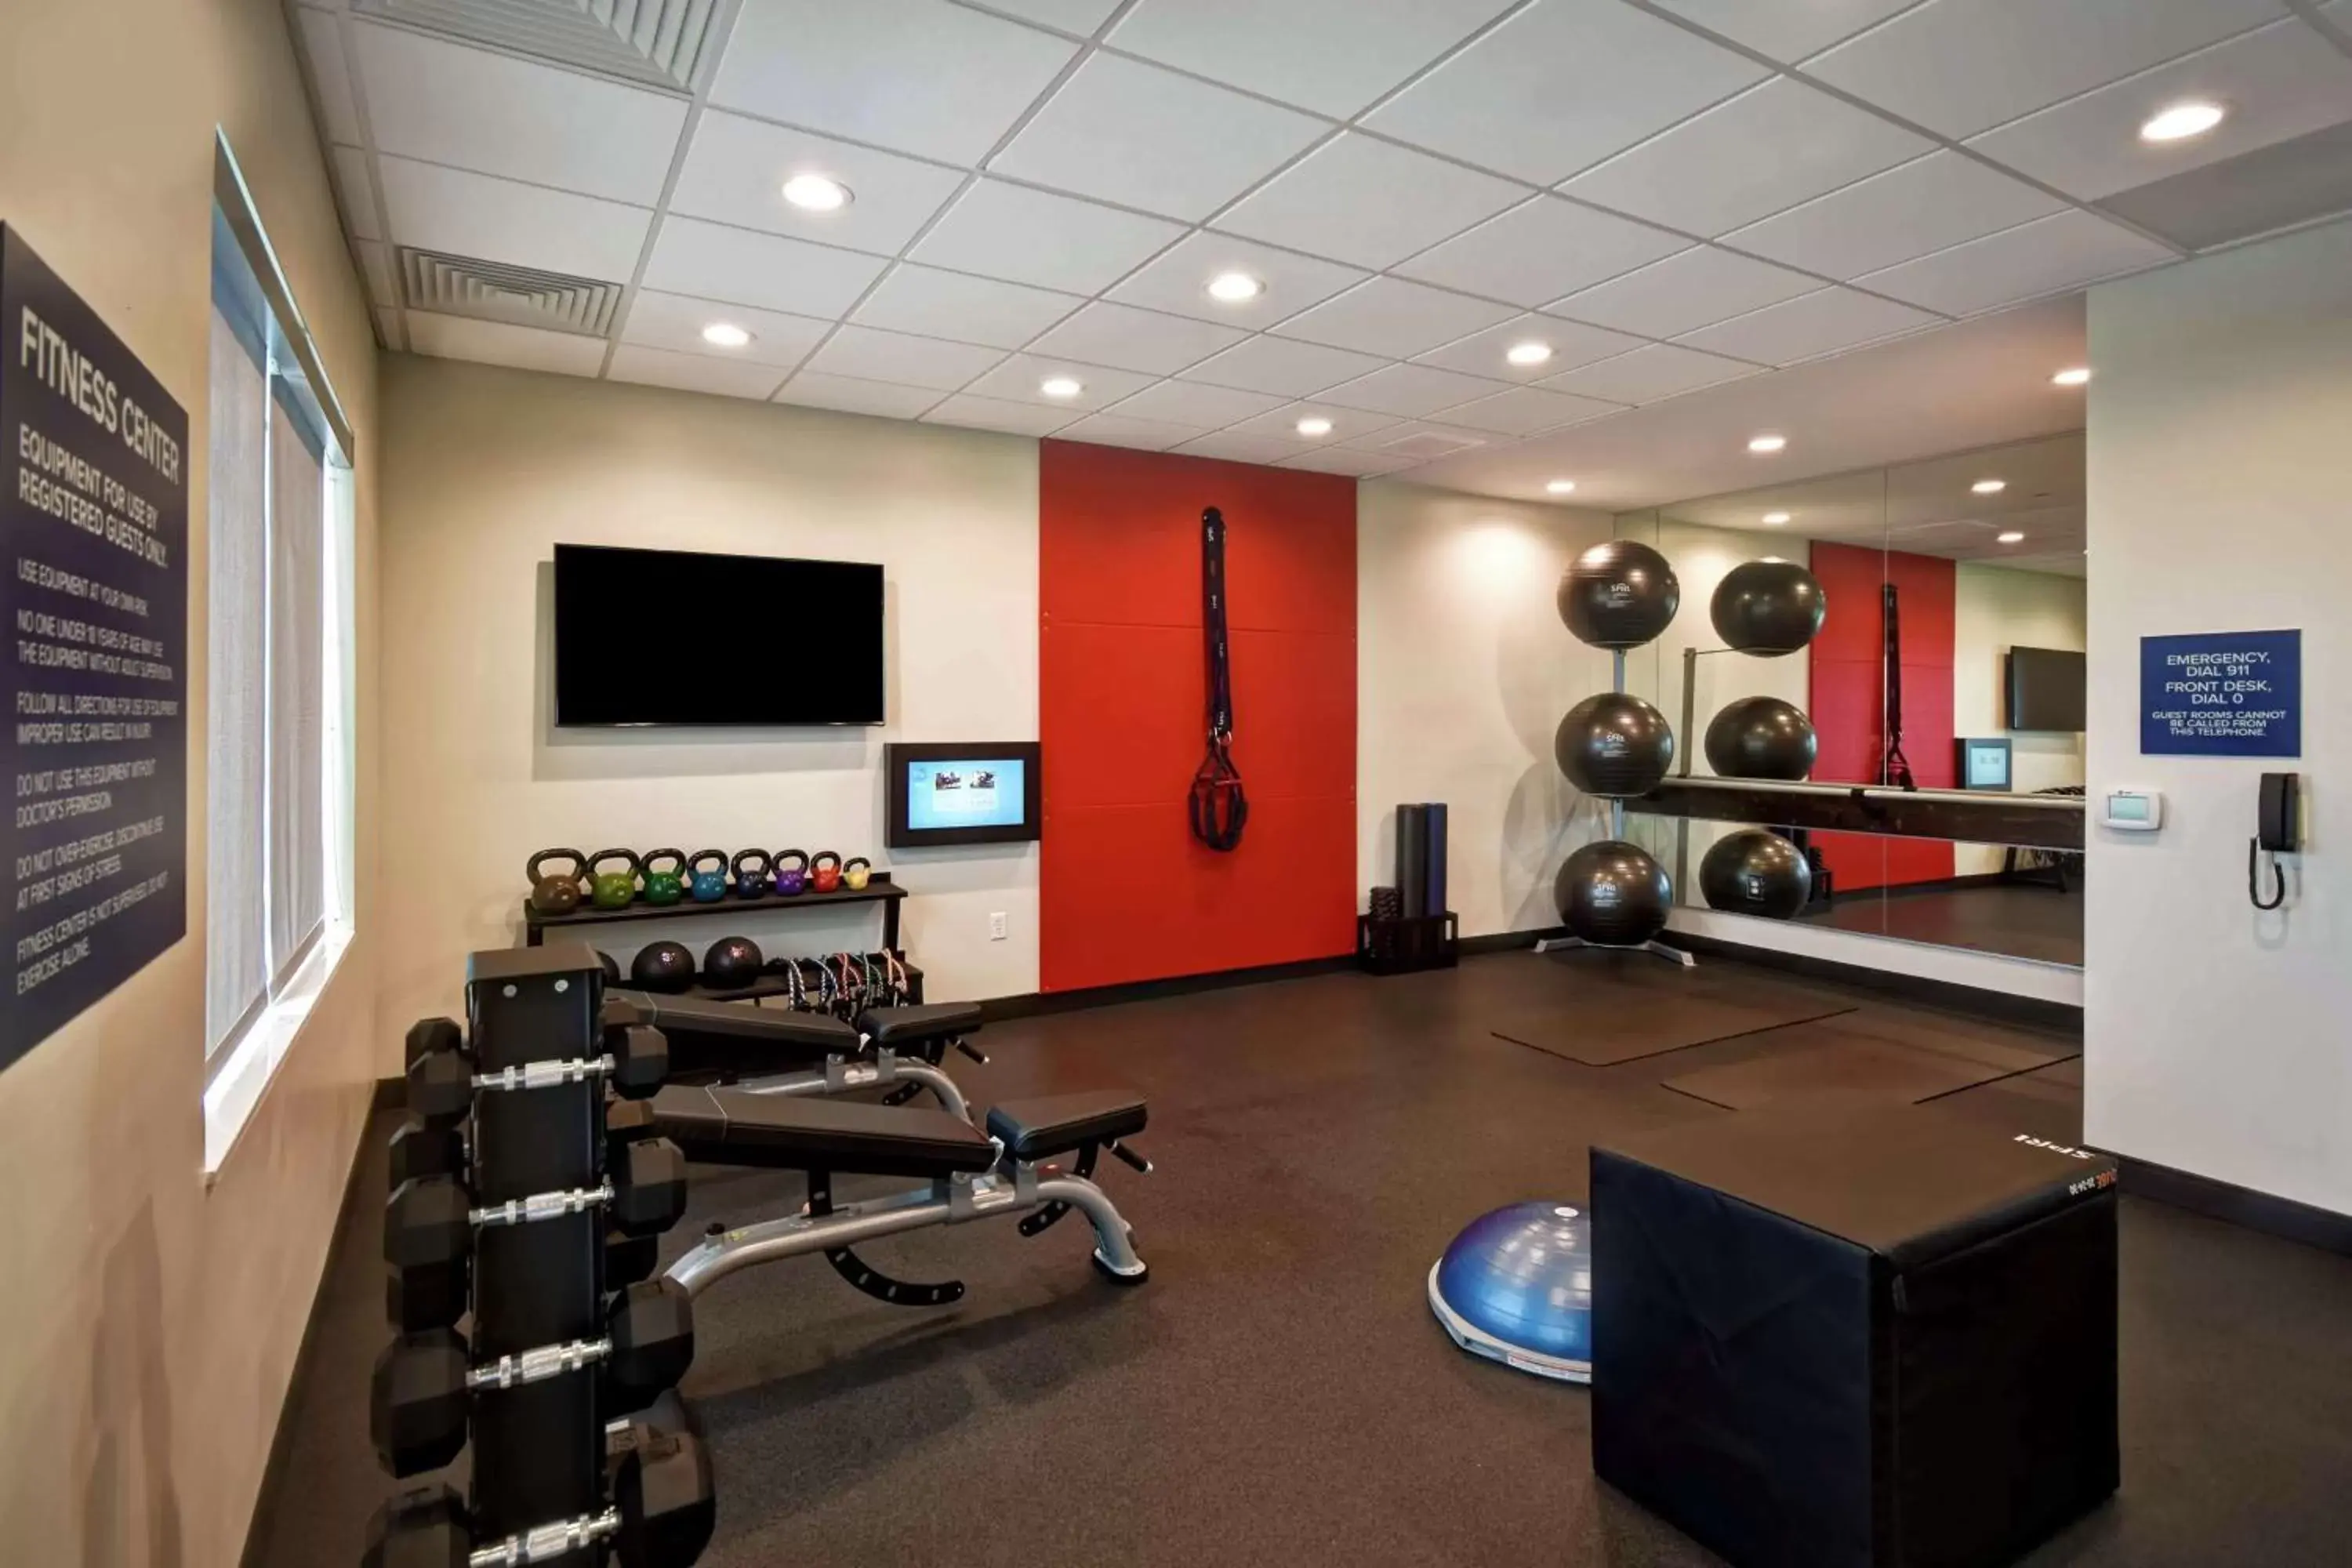 Fitness centre/facilities, Fitness Center/Facilities in Tru By Hilton North Platte